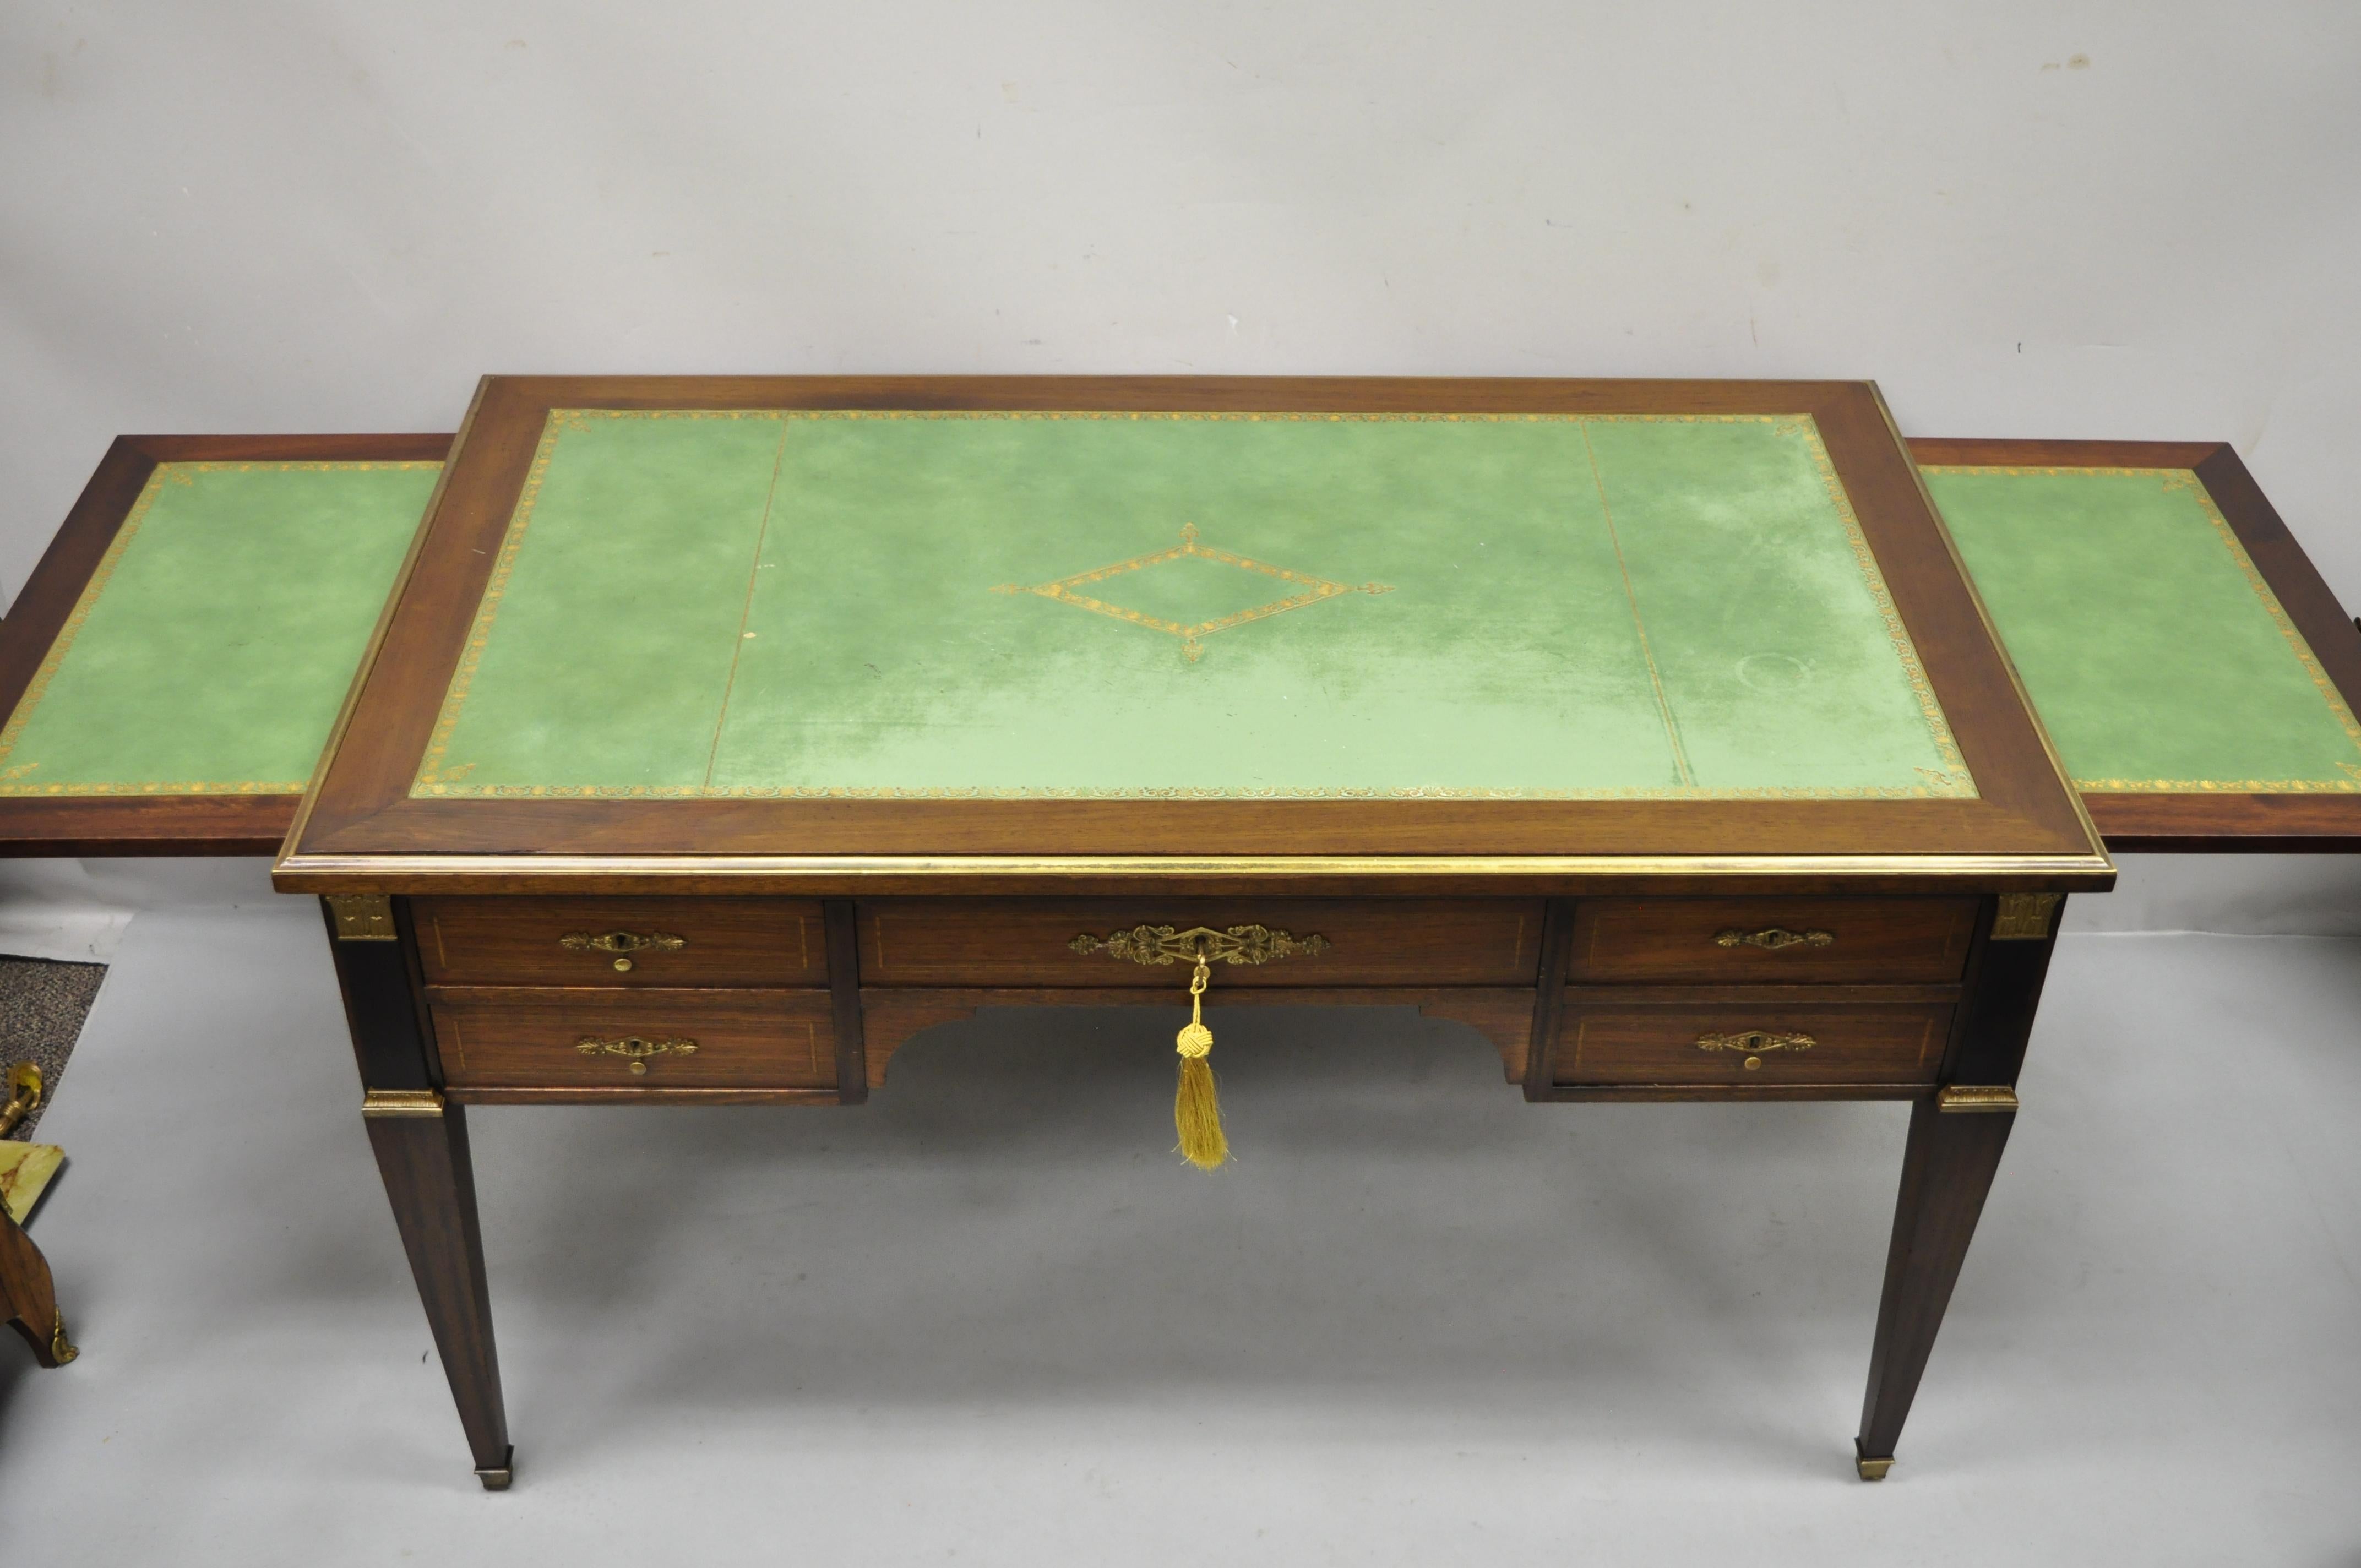 Antique French Directoire Neoclassical / Empire style green leather top mahogany bureau plat writing desk with bronze ormolu. Item features 2 pull out green tooled leather sides, bronze ormolu, green tooled leather top, ebonized columns, beautiful